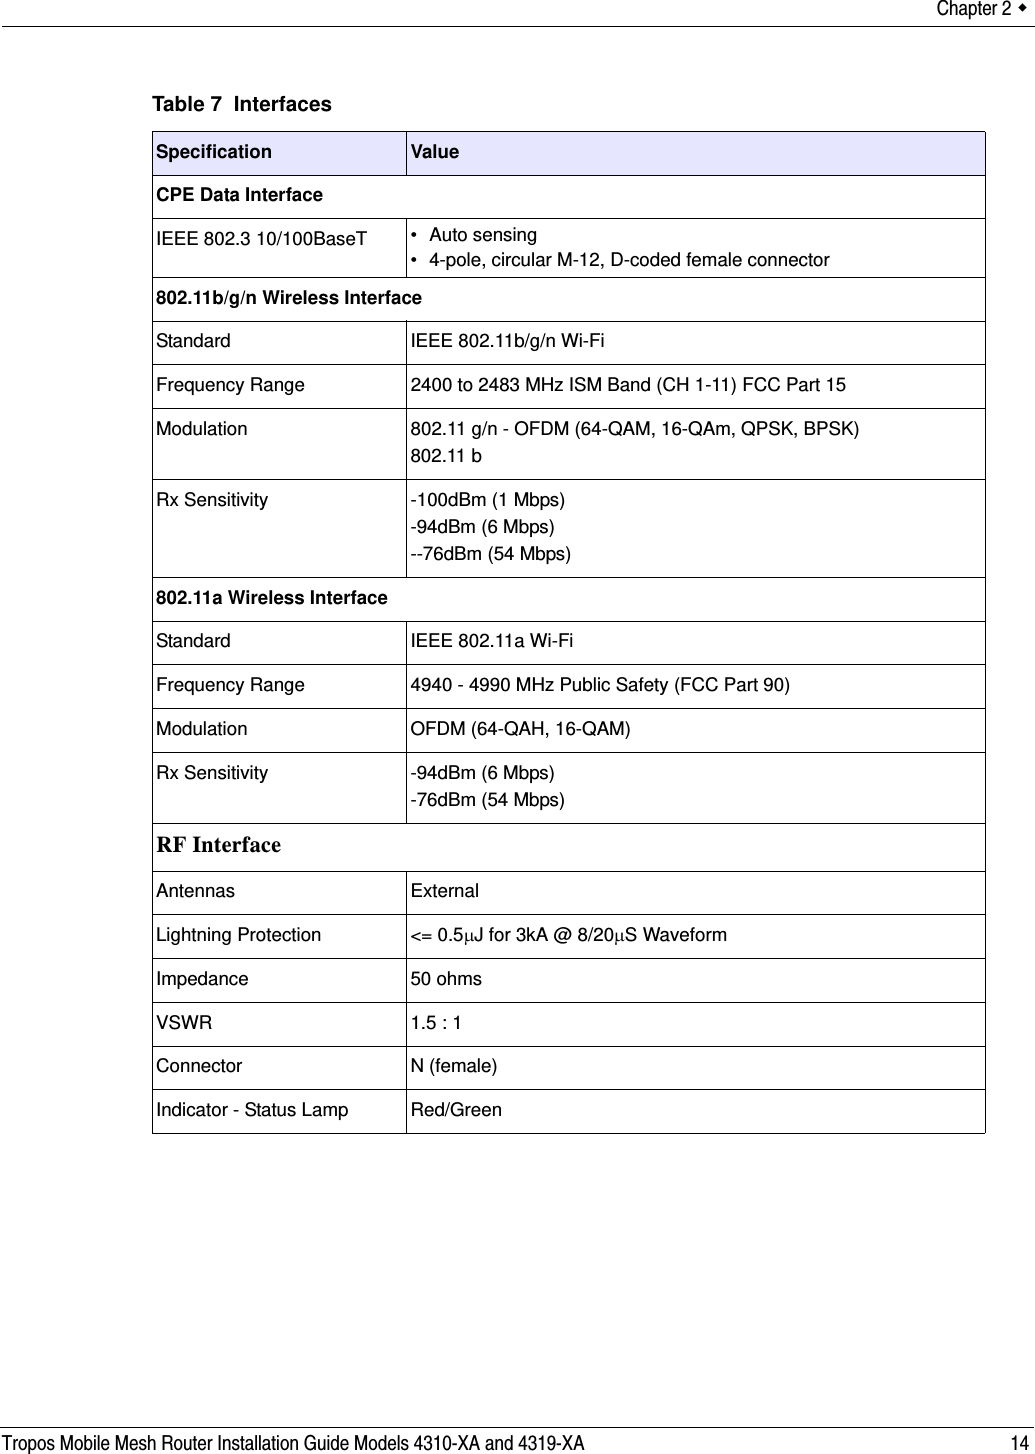 Chapter 2  Tropos Mobile Mesh Router Installation Guide Models 4310-XA and 4319-XA 14Table 7  InterfacesSpecification ValueCPE Data InterfaceIEEE 802.3 10/100BaseT • Auto sensing• 4-pole, circular M-12, D-coded female connector802.11b/g/n Wireless InterfaceStandard IEEE 802.11b/g/n Wi-FiFrequency Range 2400 to 2483 MHz ISM Band (CH 1-11) FCC Part 15Modulation 802.11 g/n - OFDM (64-QAM, 16-QAm, QPSK, BPSK)802.11 bRx Sensitivity -100dBm (1 Mbps)-94dBm (6 Mbps)--76dBm (54 Mbps)802.11a Wireless InterfaceStandard IEEE 802.11a Wi-FiFrequency Range 4940 - 4990 MHz Public Safety (FCC Part 90)Modulation OFDM (64-QAH, 16-QAM)Rx Sensitivity -94dBm (6 Mbps)-76dBm (54 Mbps)RF InterfaceAntennas ExternalLightning Protection &lt;= 0.5μJ for 3kA @ 8/20μS WaveformImpedance 50 ohmsVSWR 1.5 : 1Connector N (female)Indicator - Status Lamp Red/Green